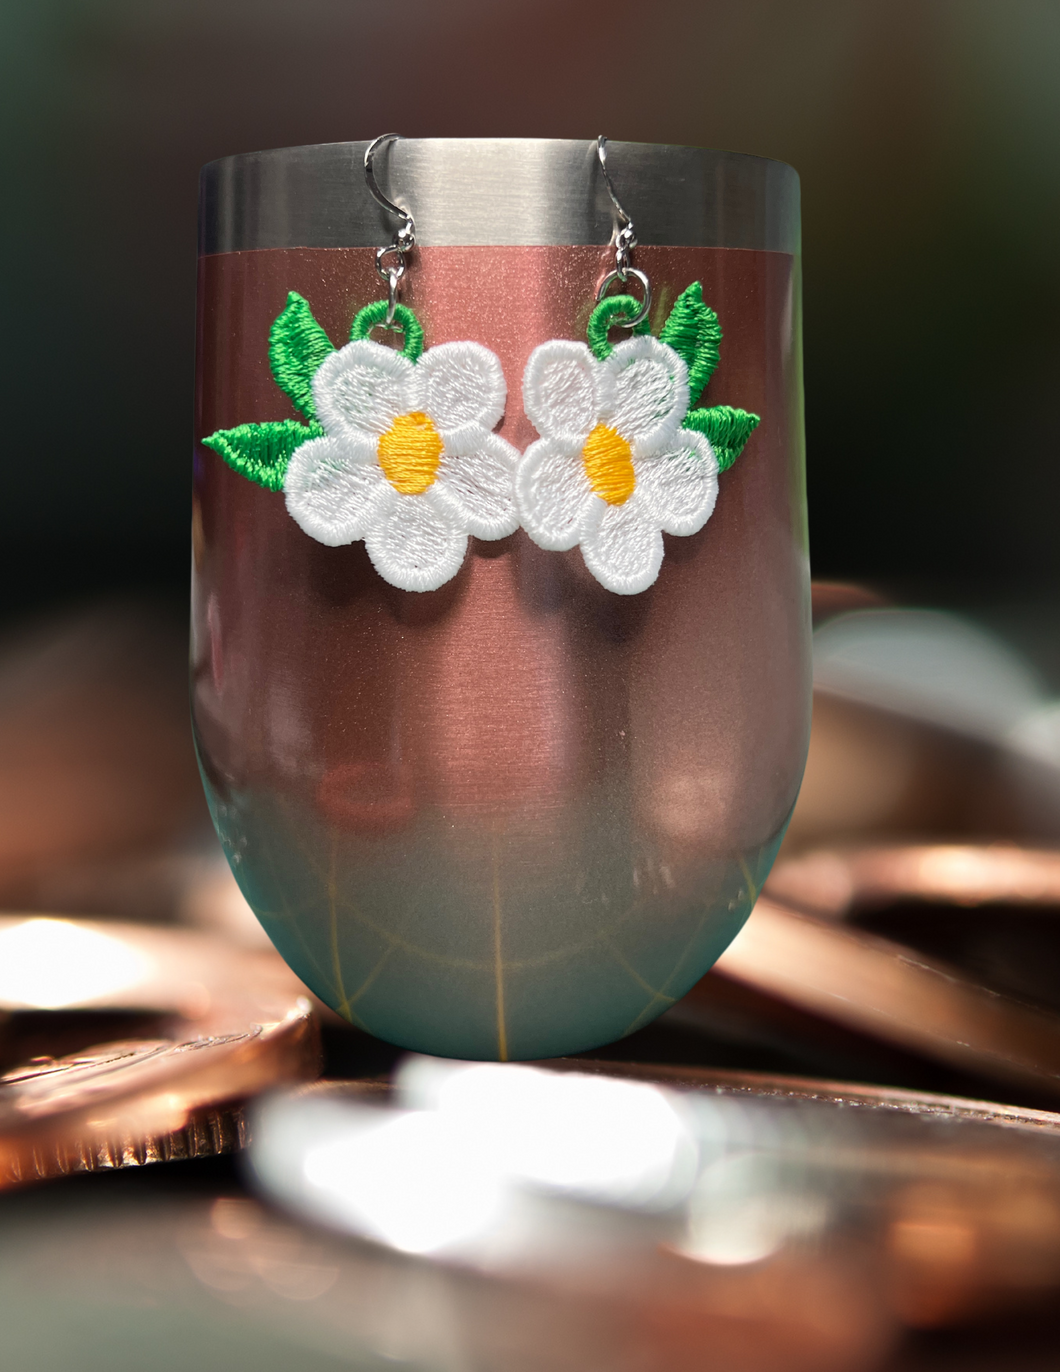 Earrings - Embroidered Daisy